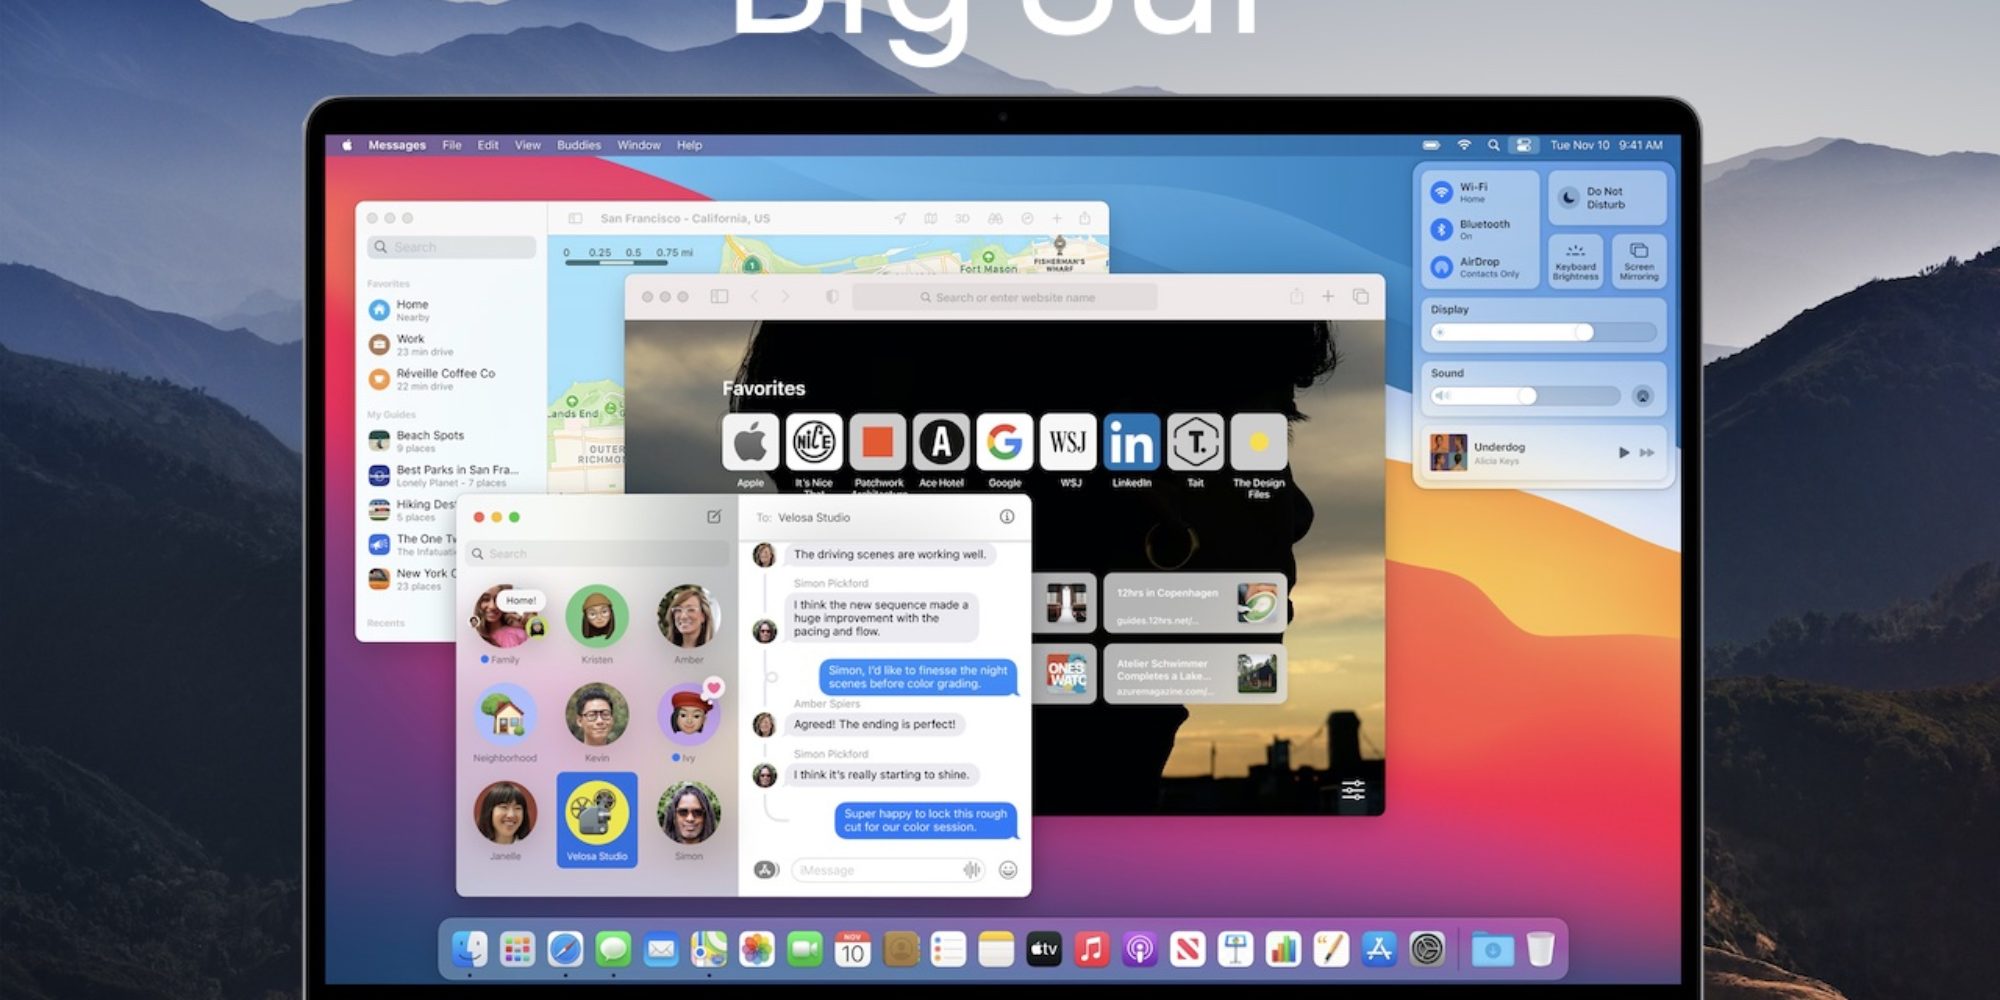 It’s Time to Consider Upgrading to macOS 11 Big Sur